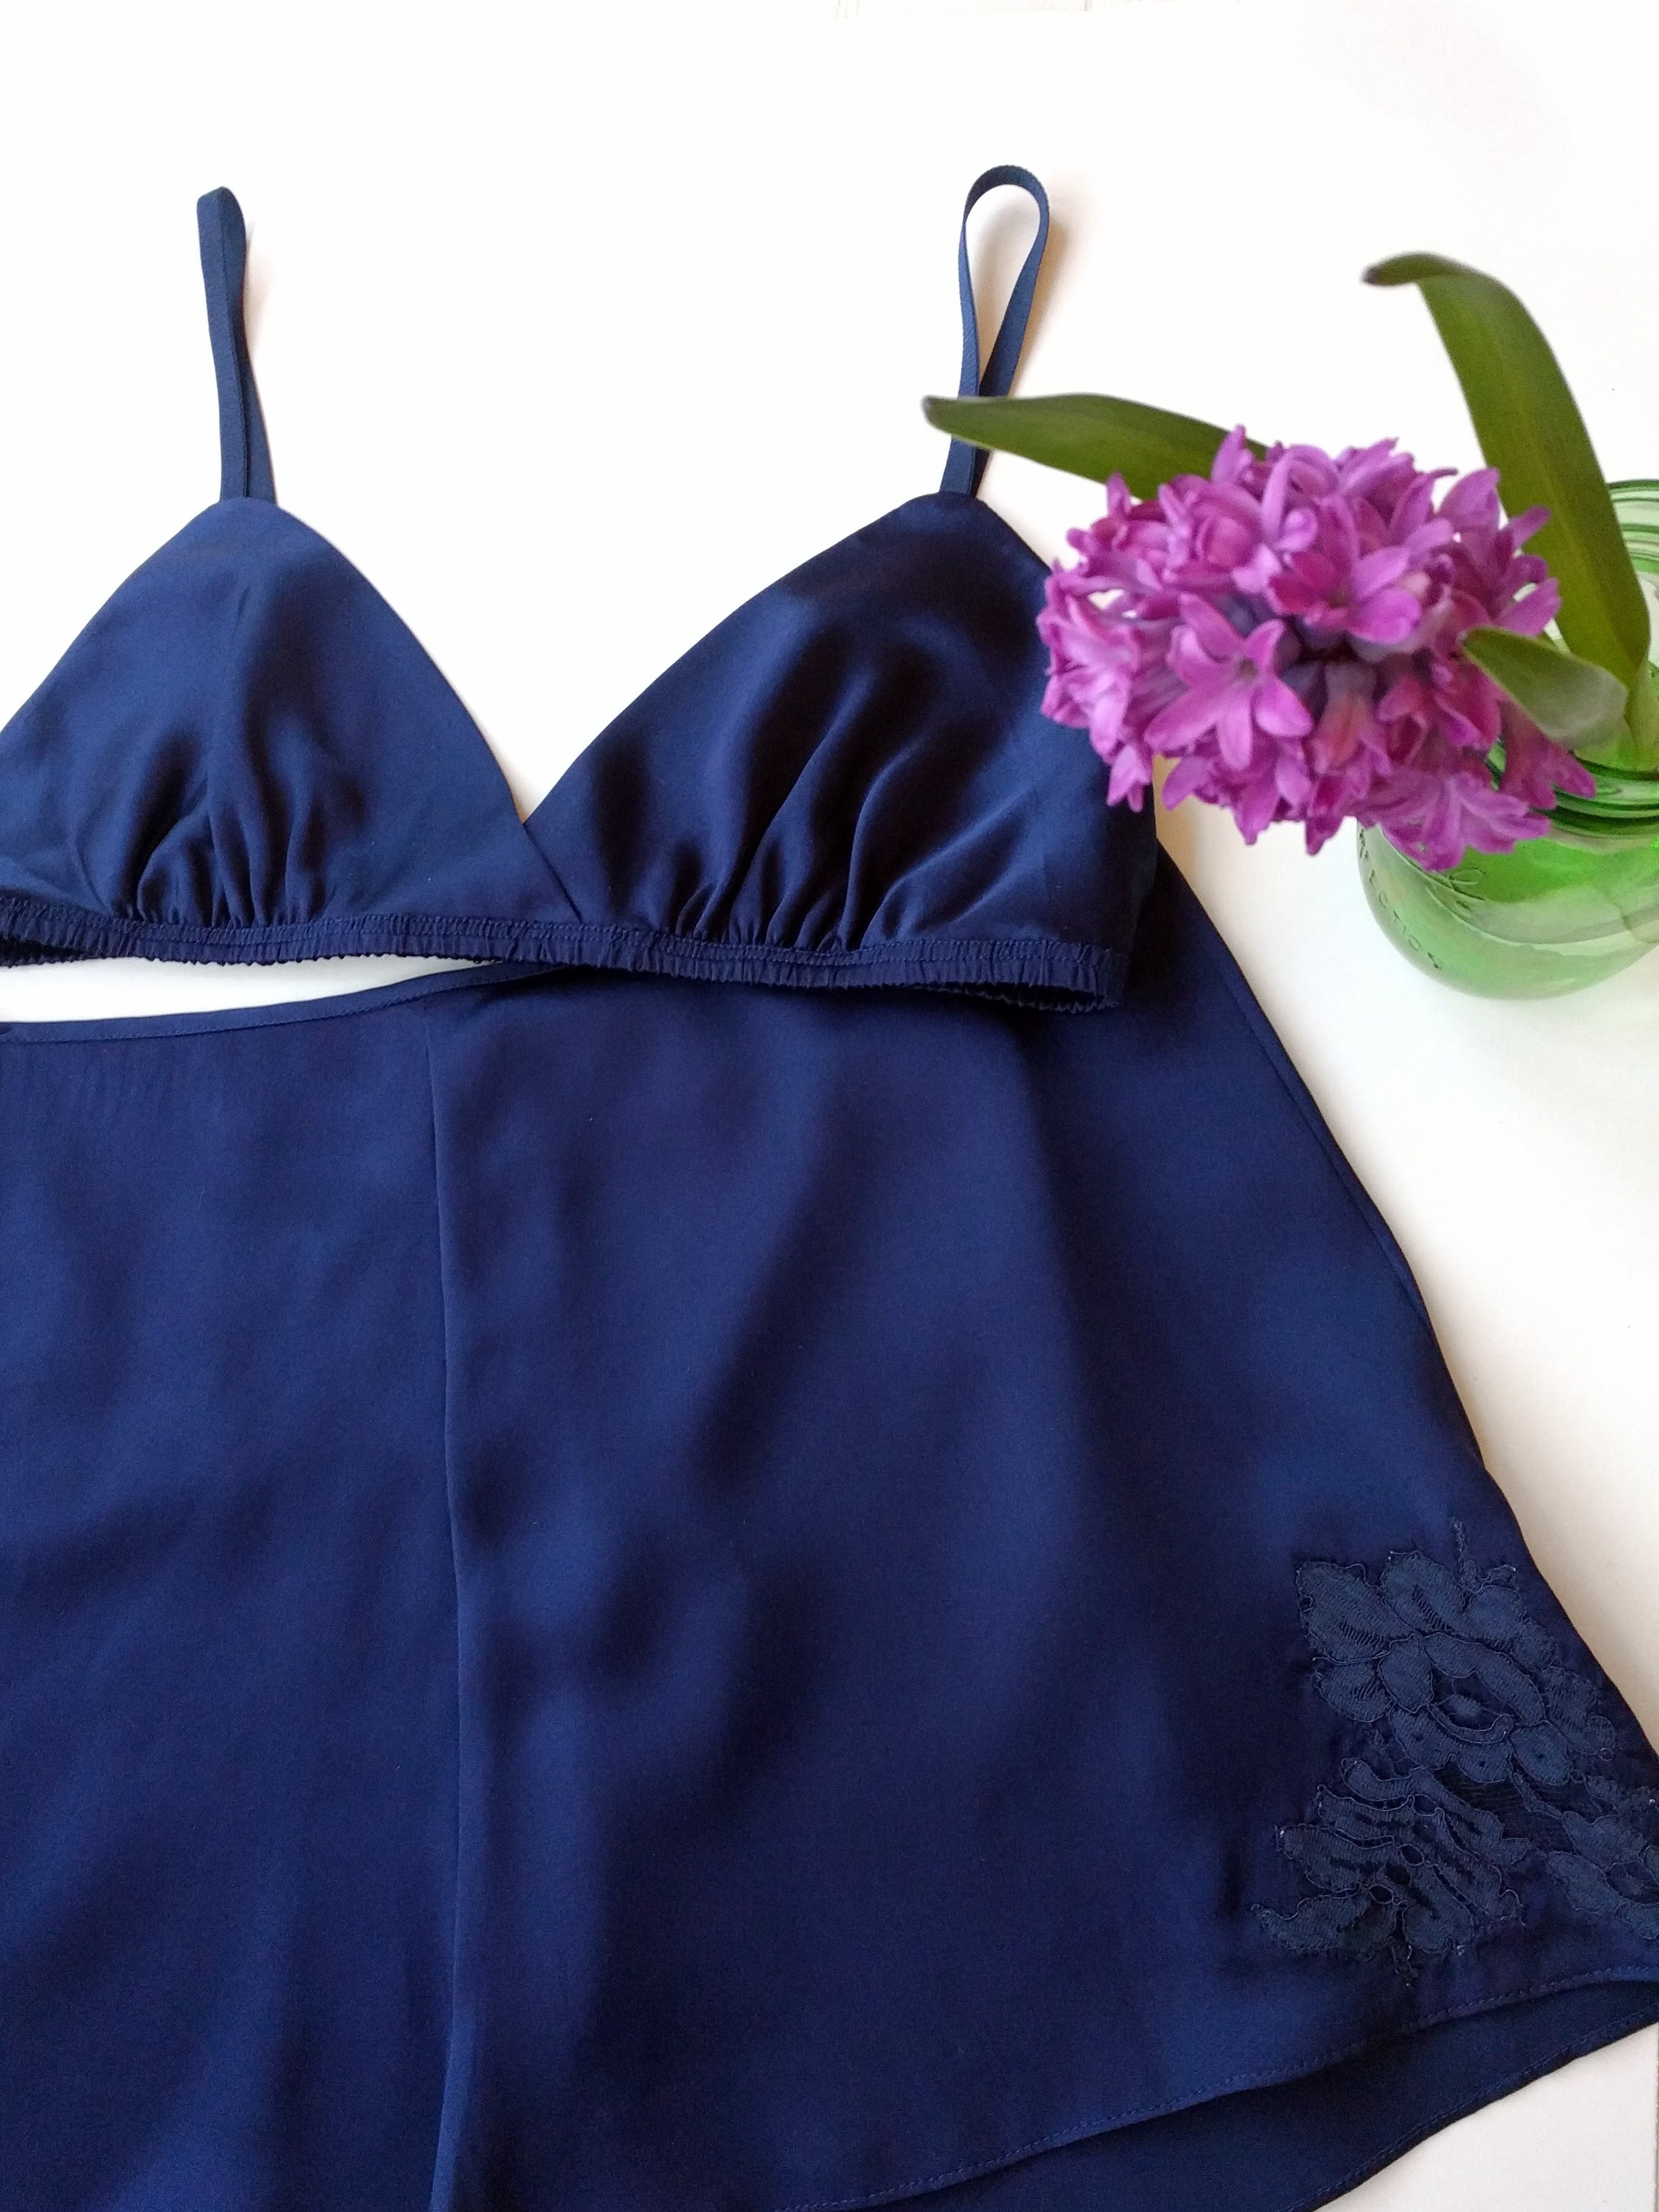 Vintage style silk bra and tap pants in navy blue satin